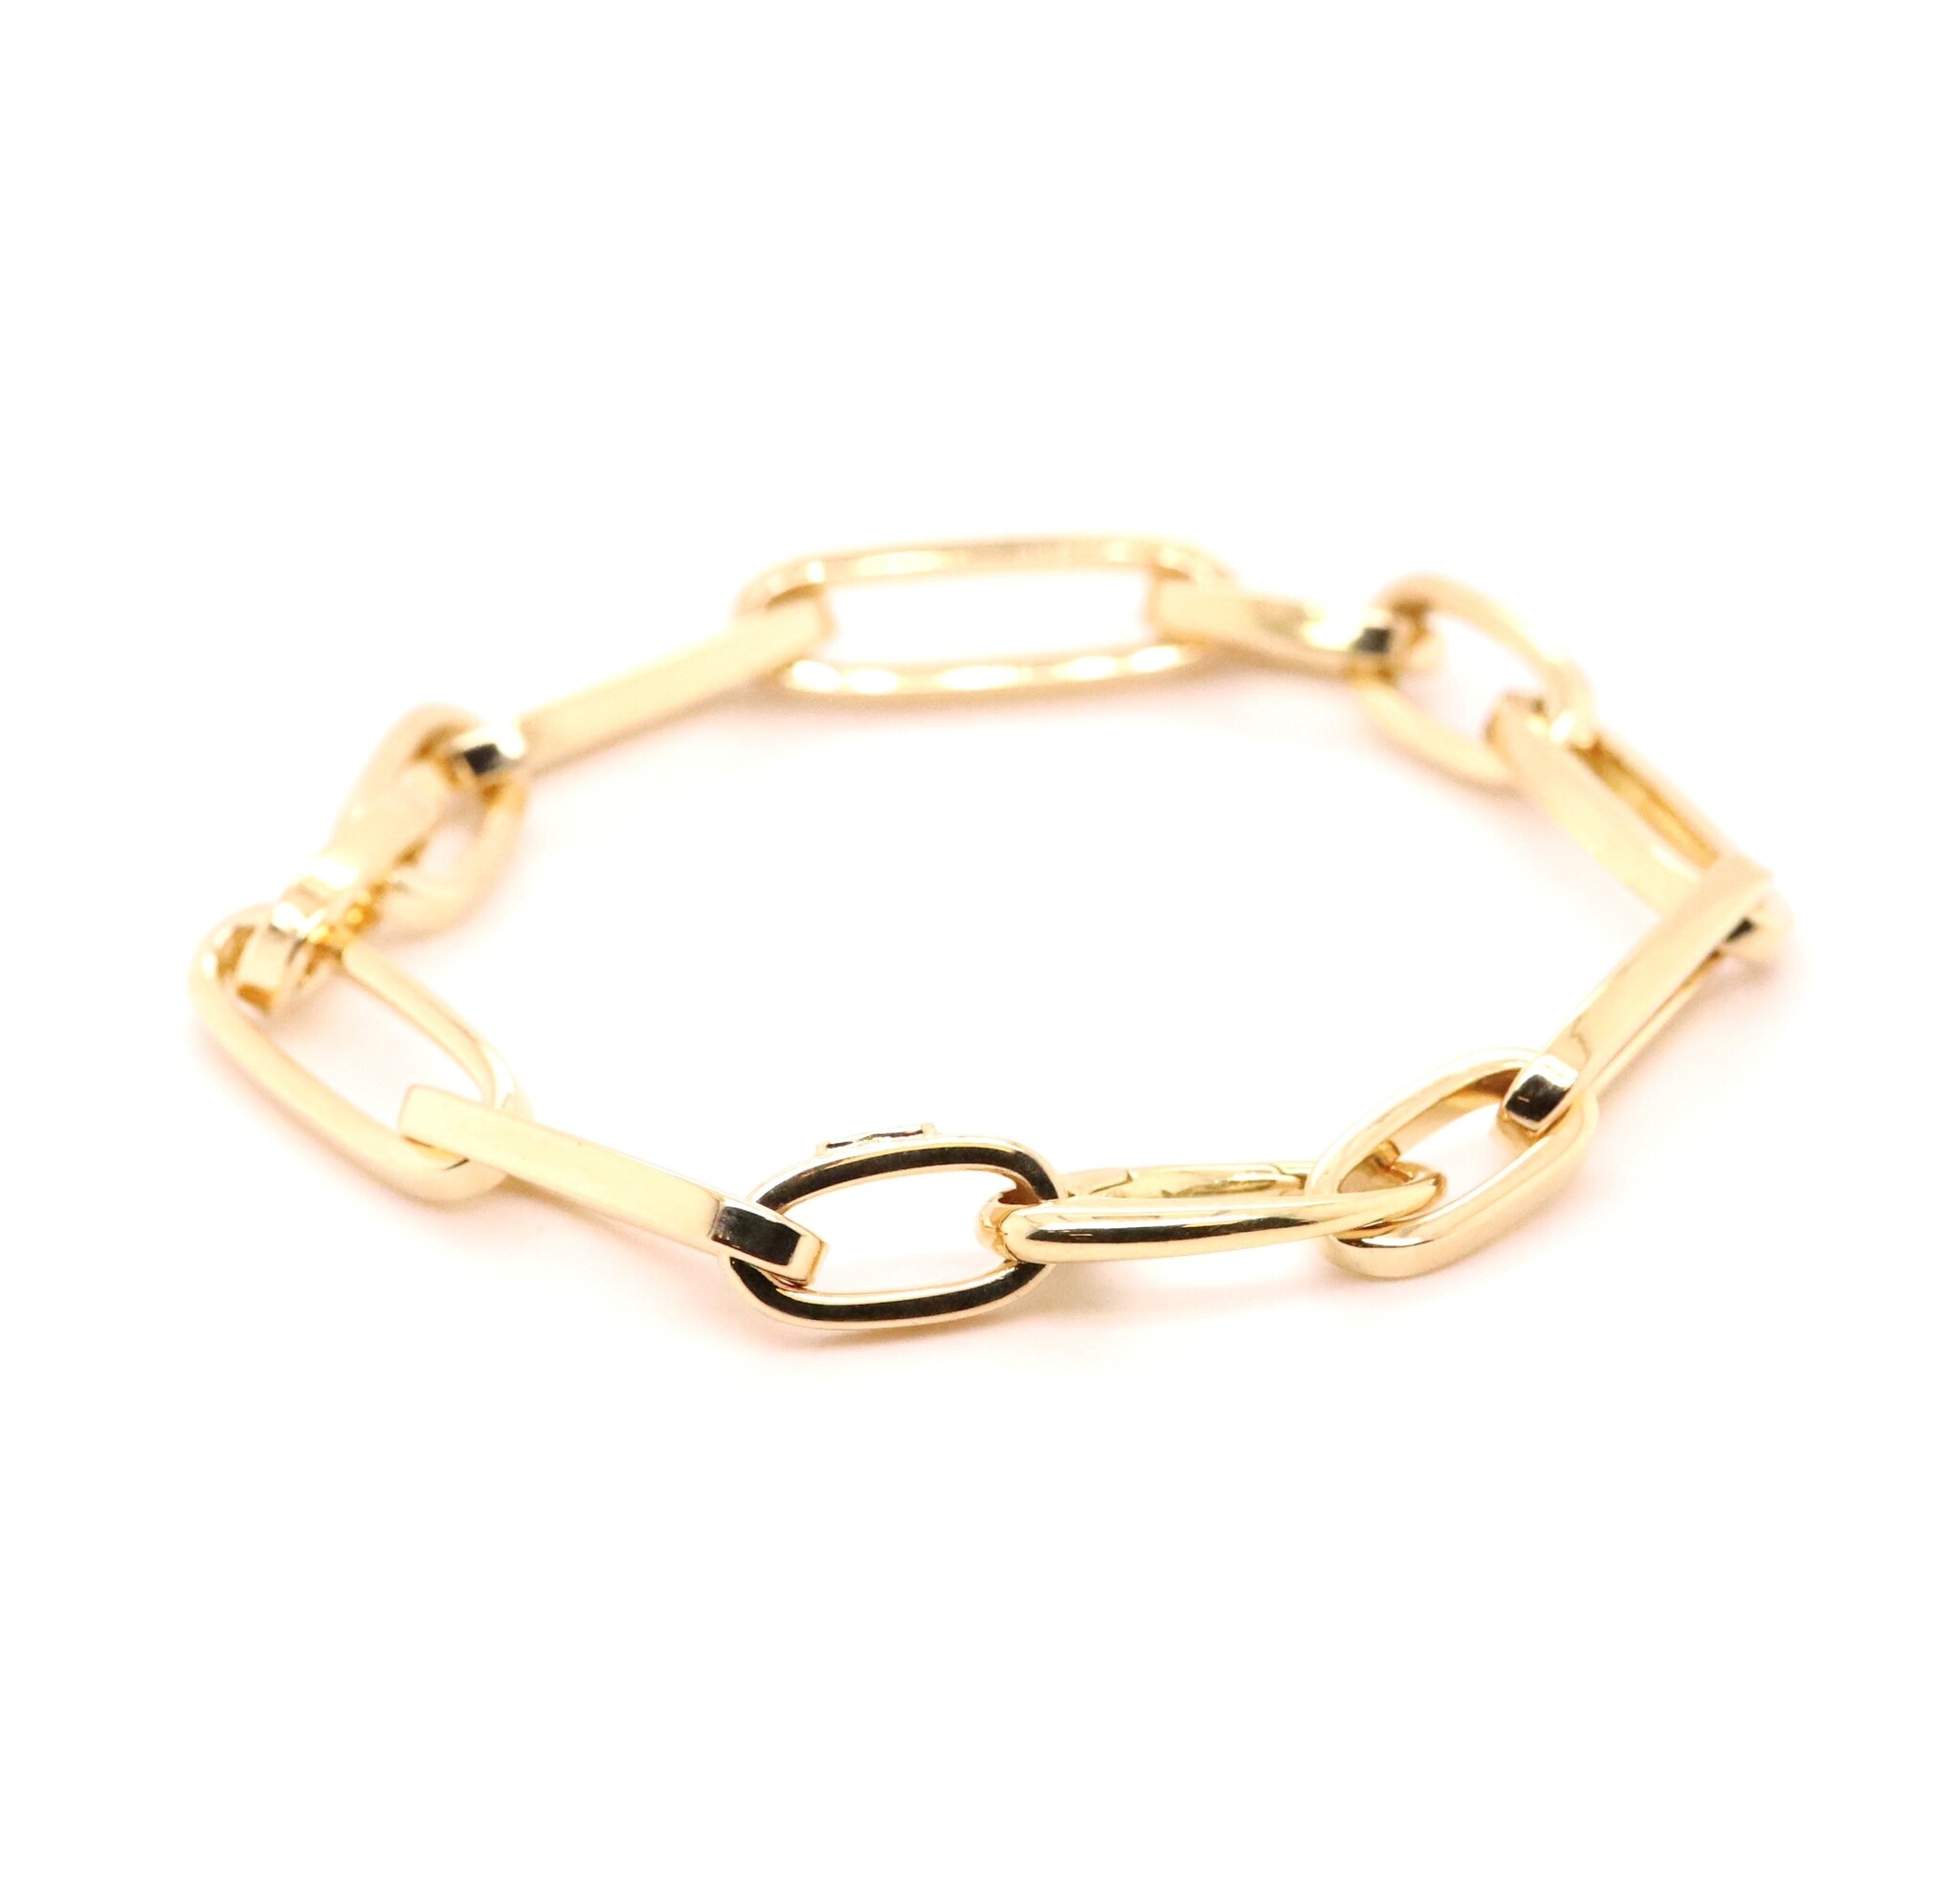 ROEMER Roemer armband paperclip 18k goud 20cm.